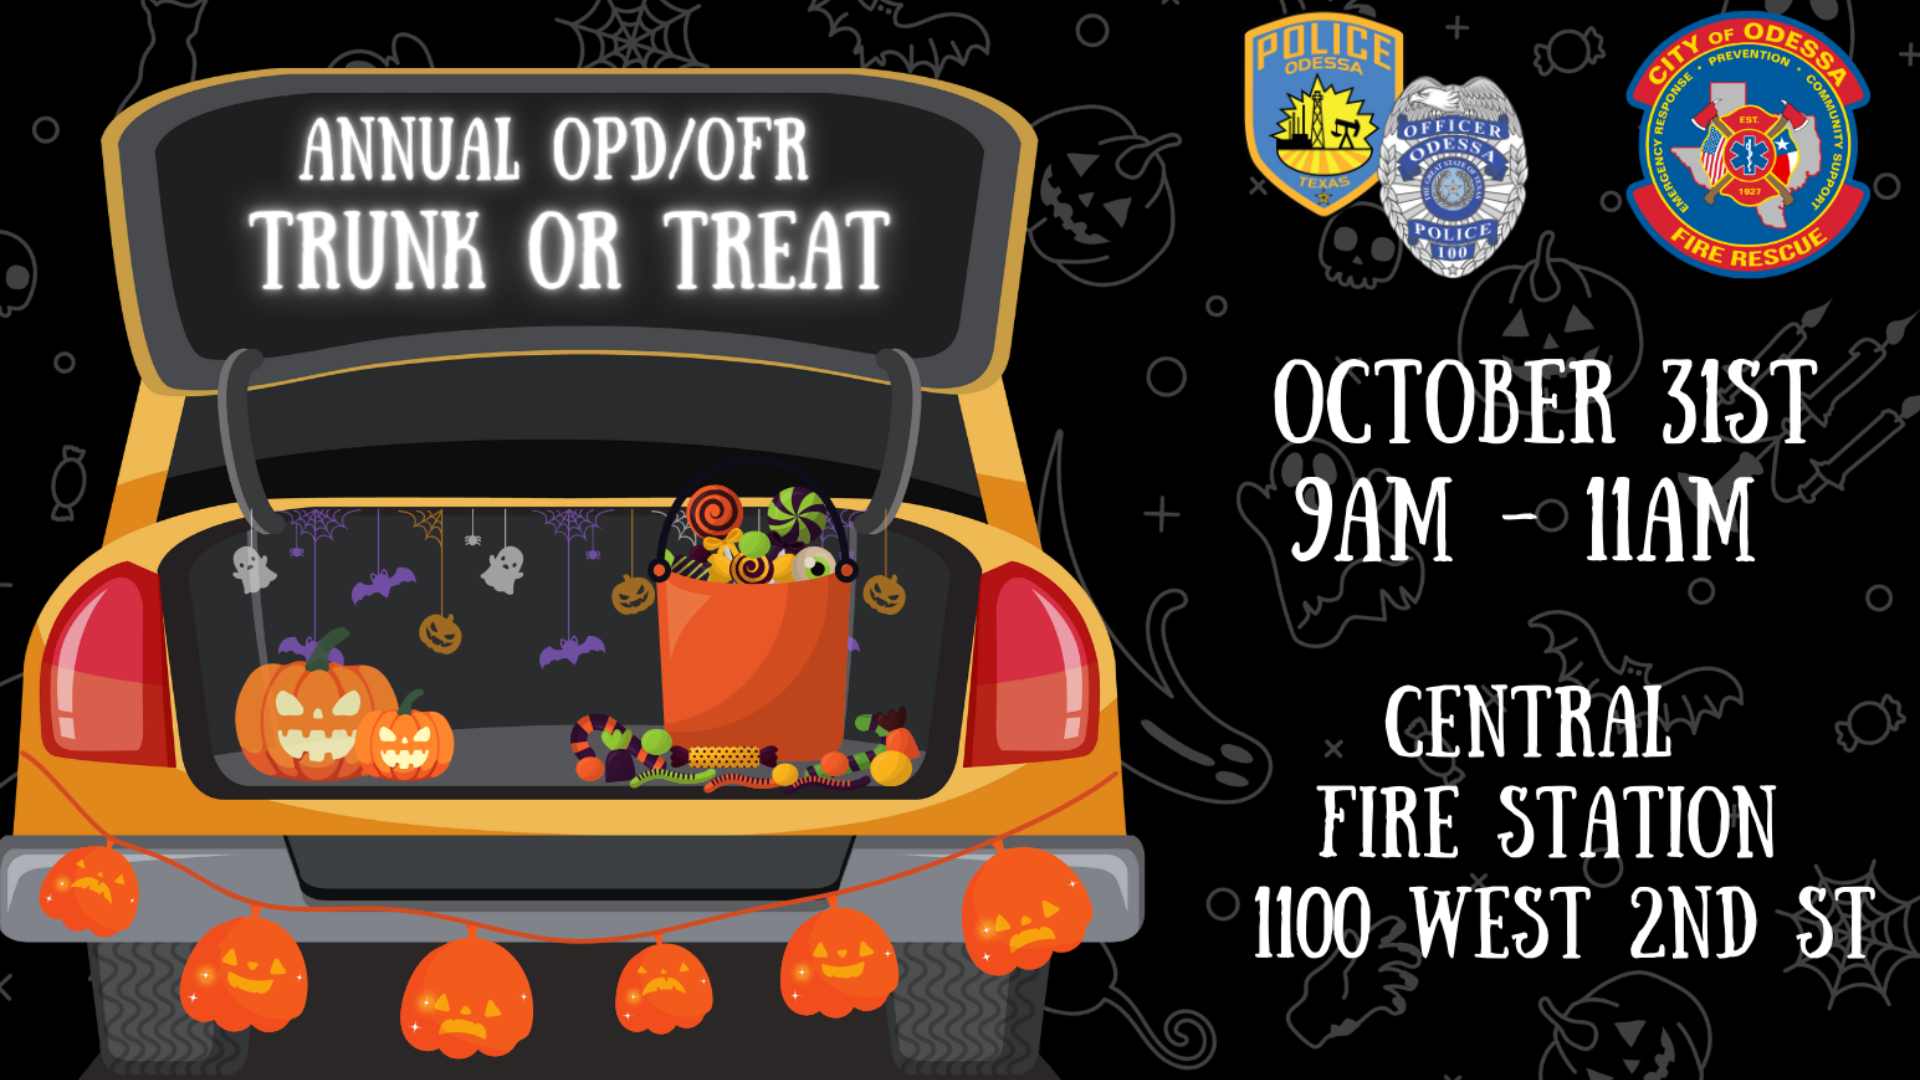 Annual OPD/OFR Trunk or Treat